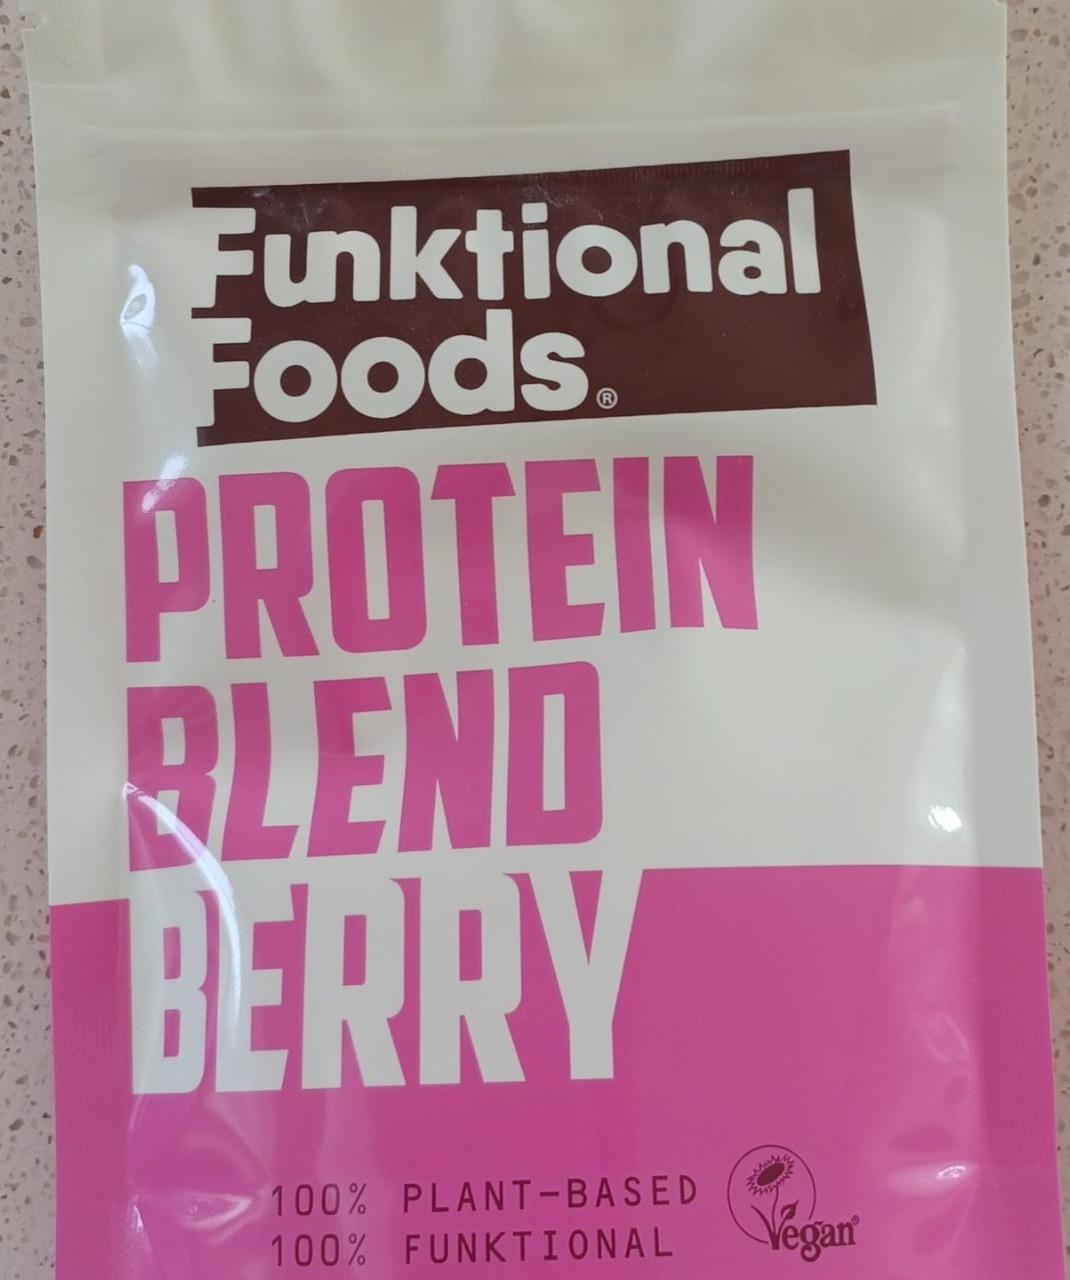 Fotografie - Protein Blend Berry Funktional Foods